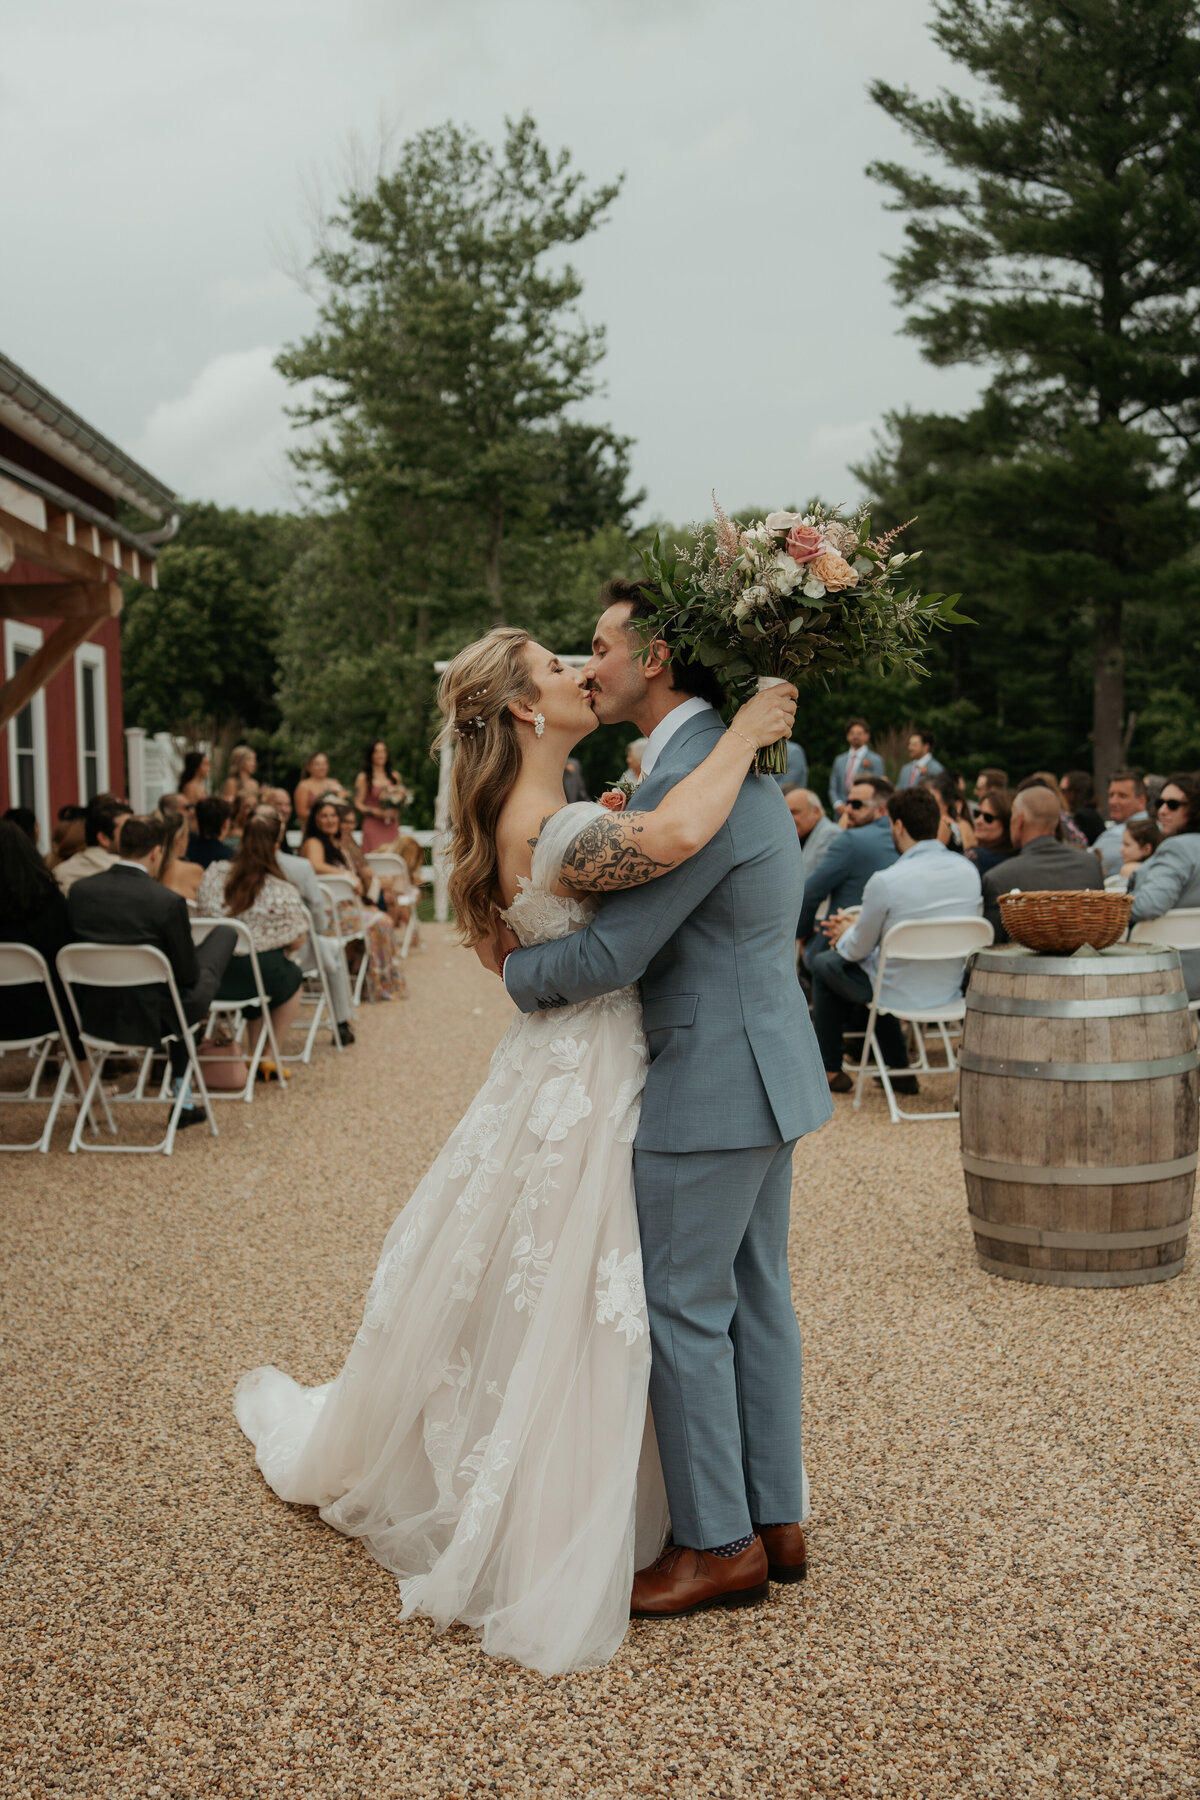 Bride and groom share a celebratory kiss after their outdoor wedding ceremony, with the bride holding a large bouquet of flowers and guests clapping in the background. The bride wears a lace gown, and the groom is in a light blue suit.